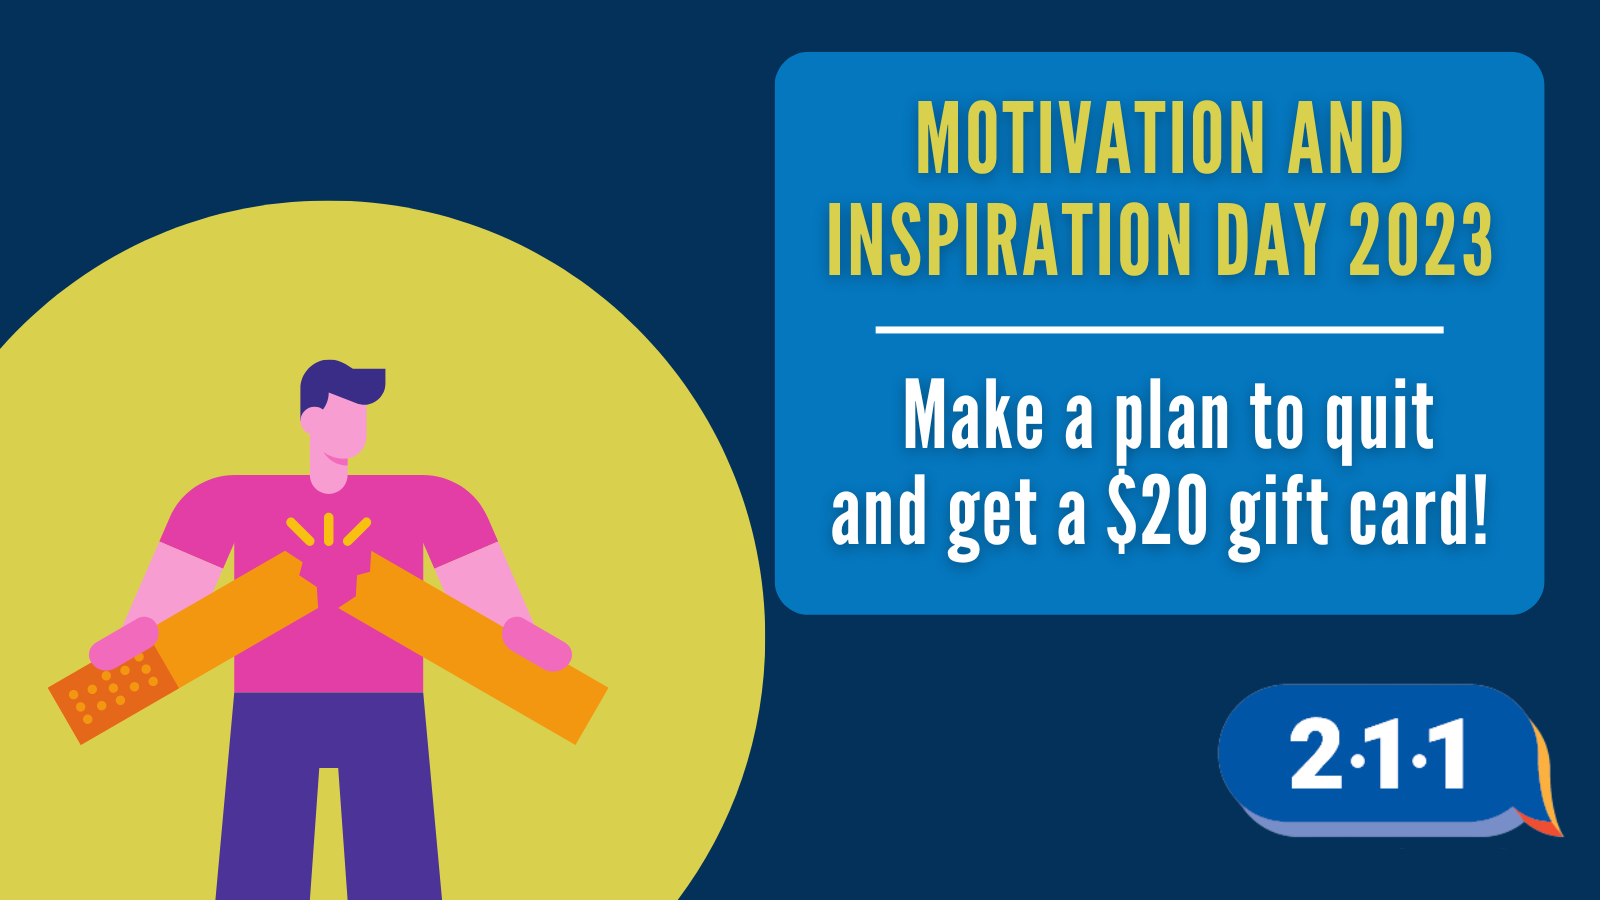 Image of someone breaking an oversize cigarette in half and text: Motivation and Inspiration Day 2023: Make a plan to quit and get a $20 gift card. 2-1-1.